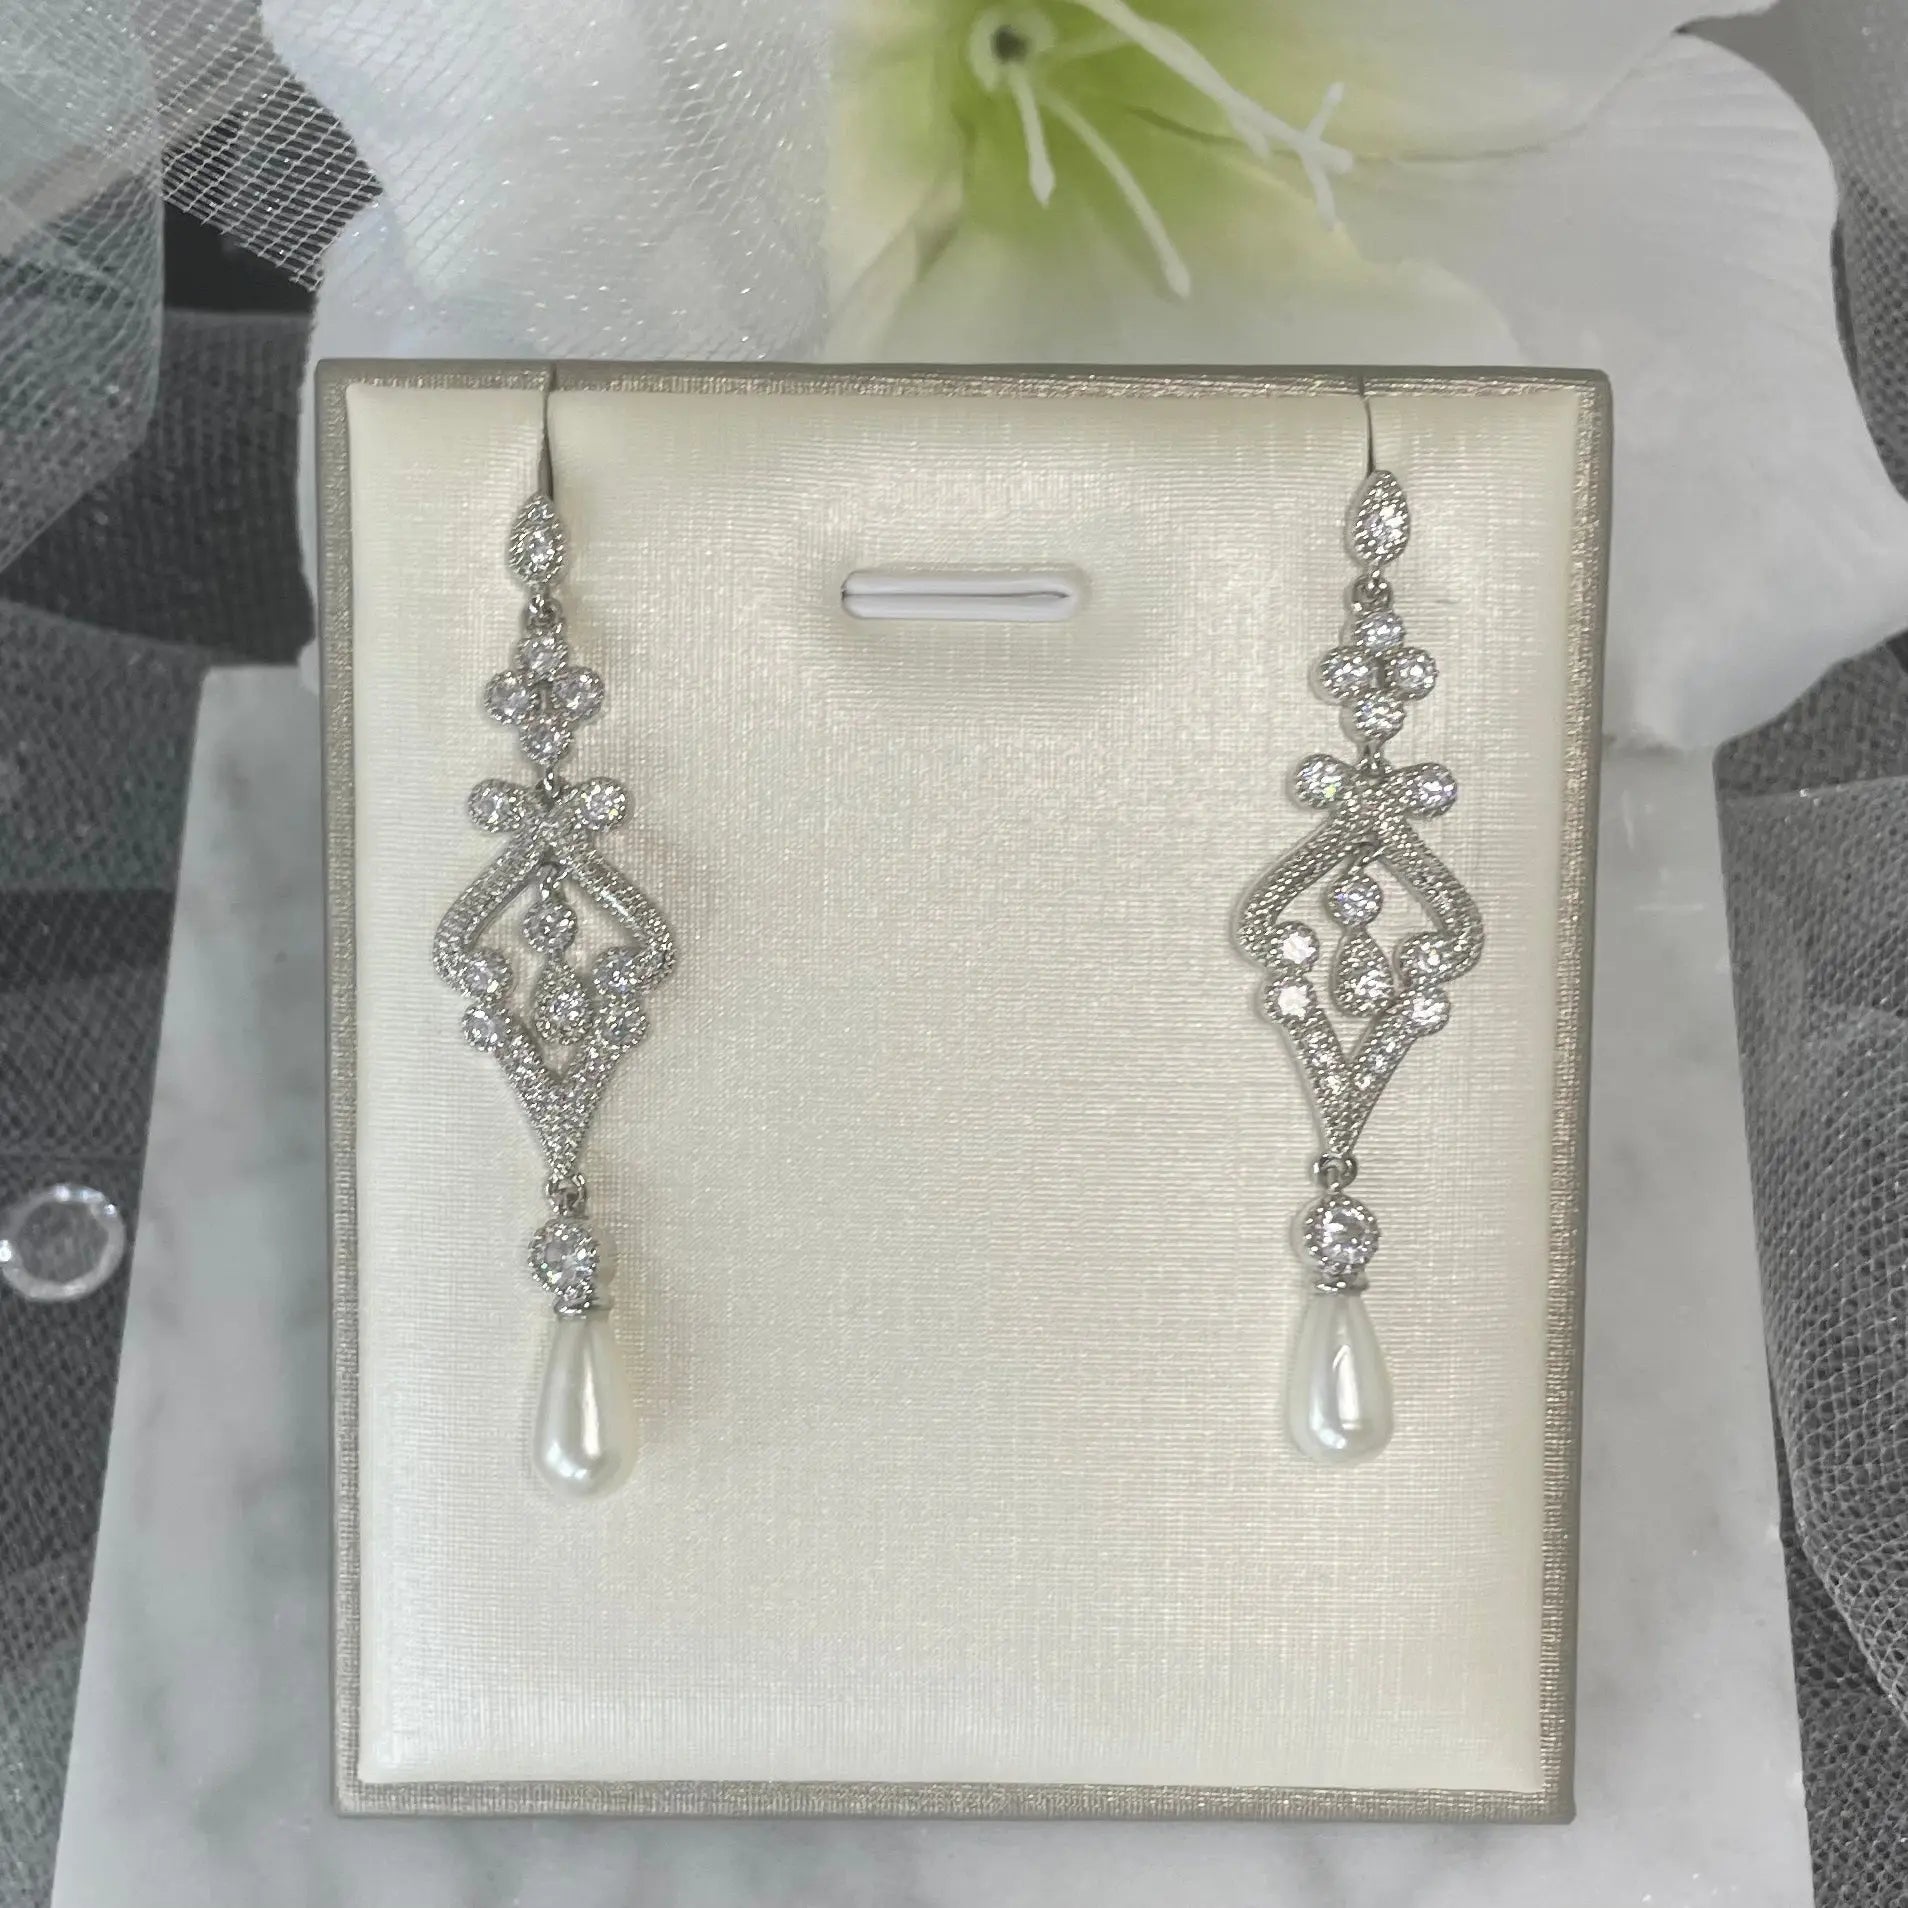 Maia Bridal Set featuring Indian-inspired design with CZ zircon inlay and teardrop pearl pendant on both earrings and necklace.